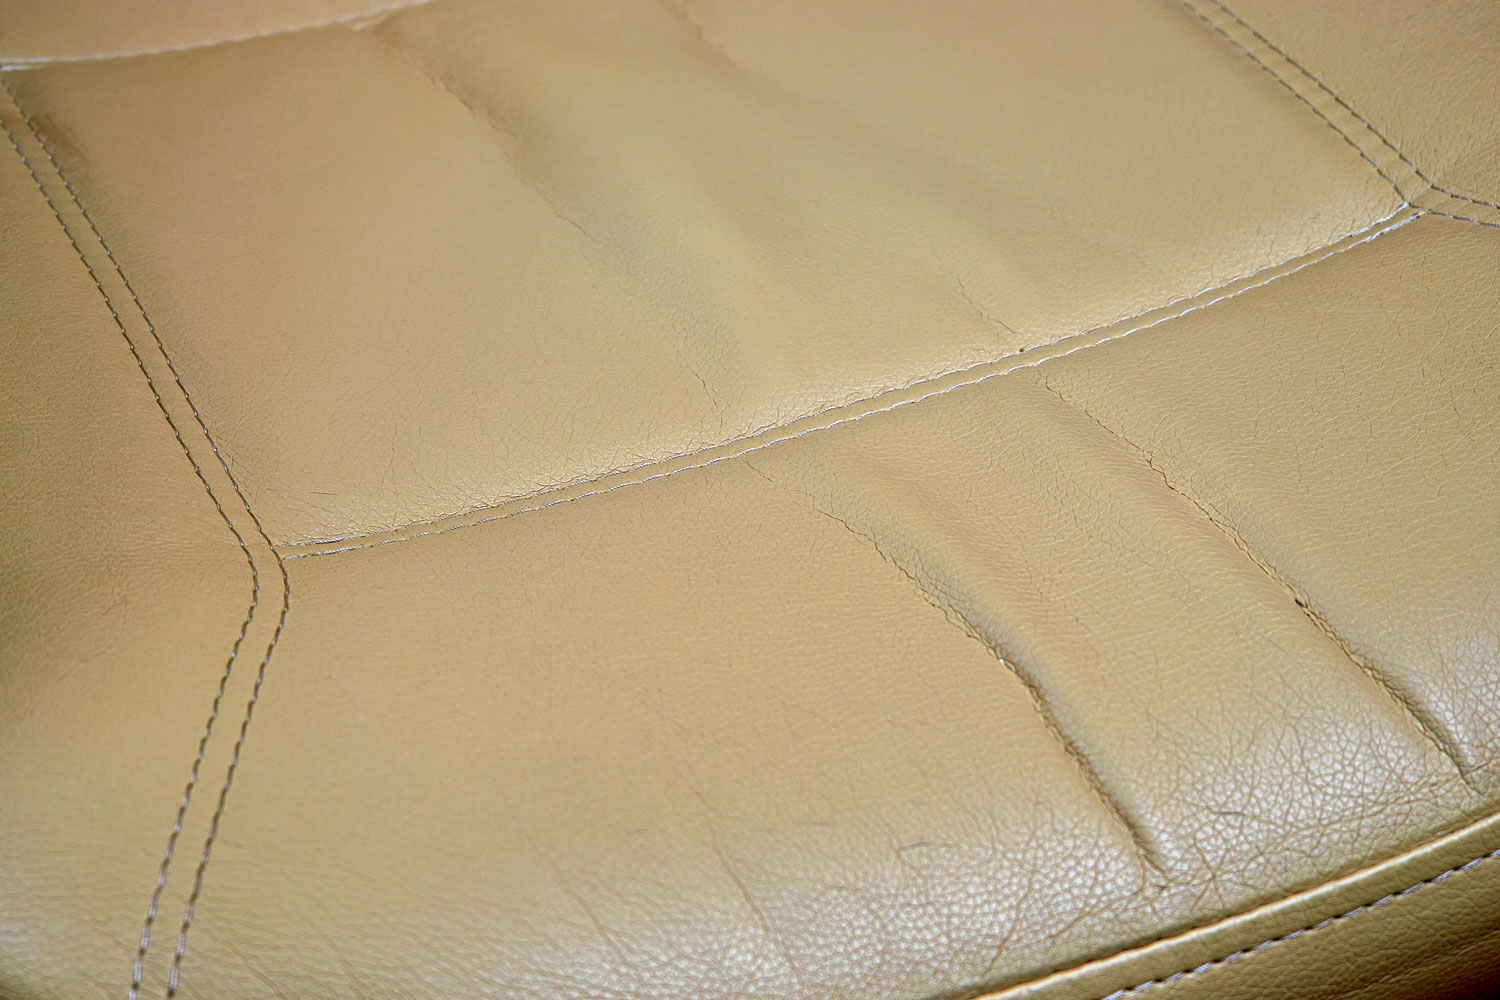 Cracks on the leather sofa due to time degradation